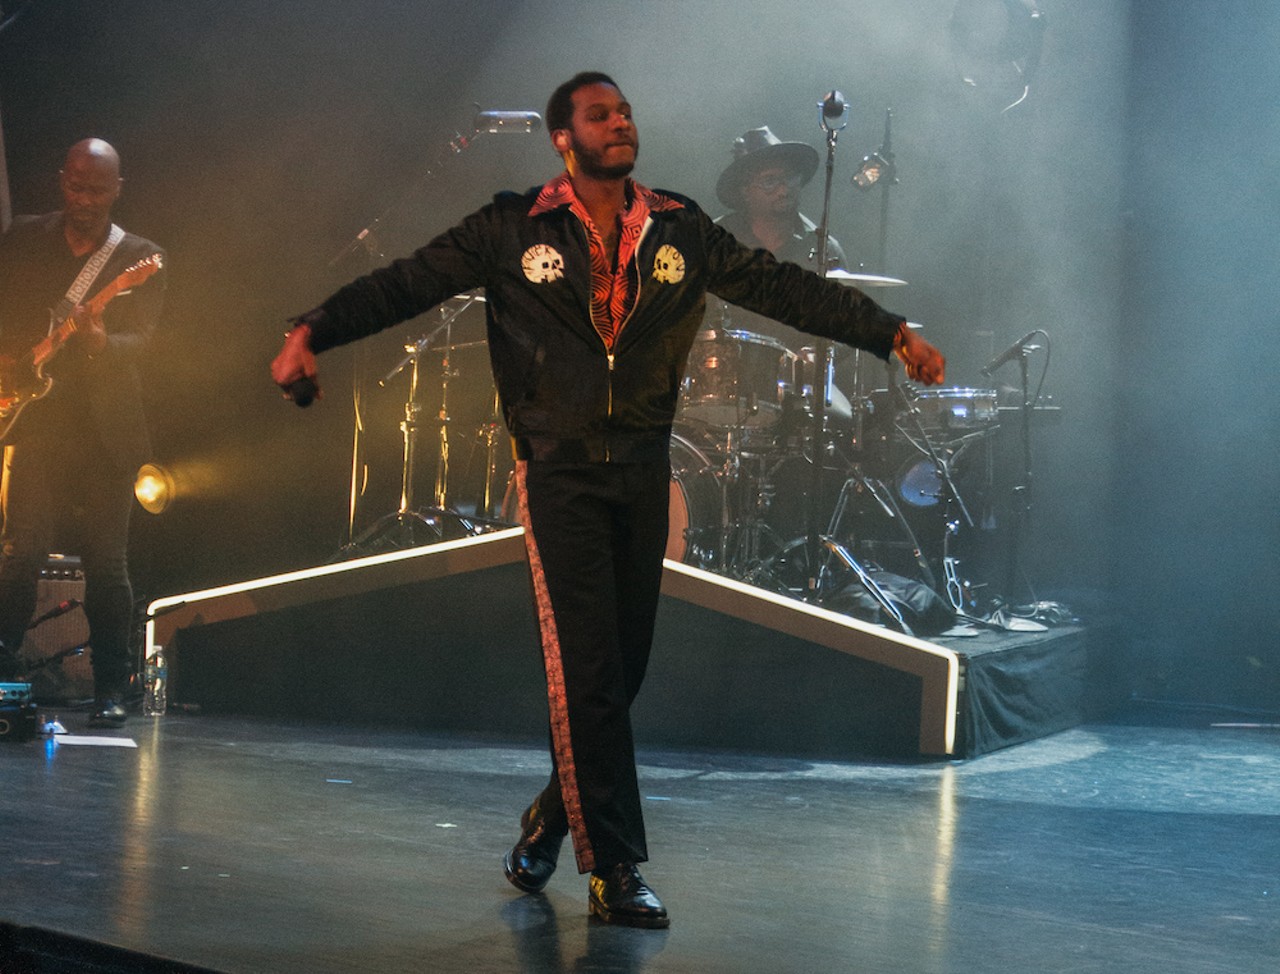 Photos of Leon Bridges and Jess Glynne at Ruth Eckerd Hall Clearwater